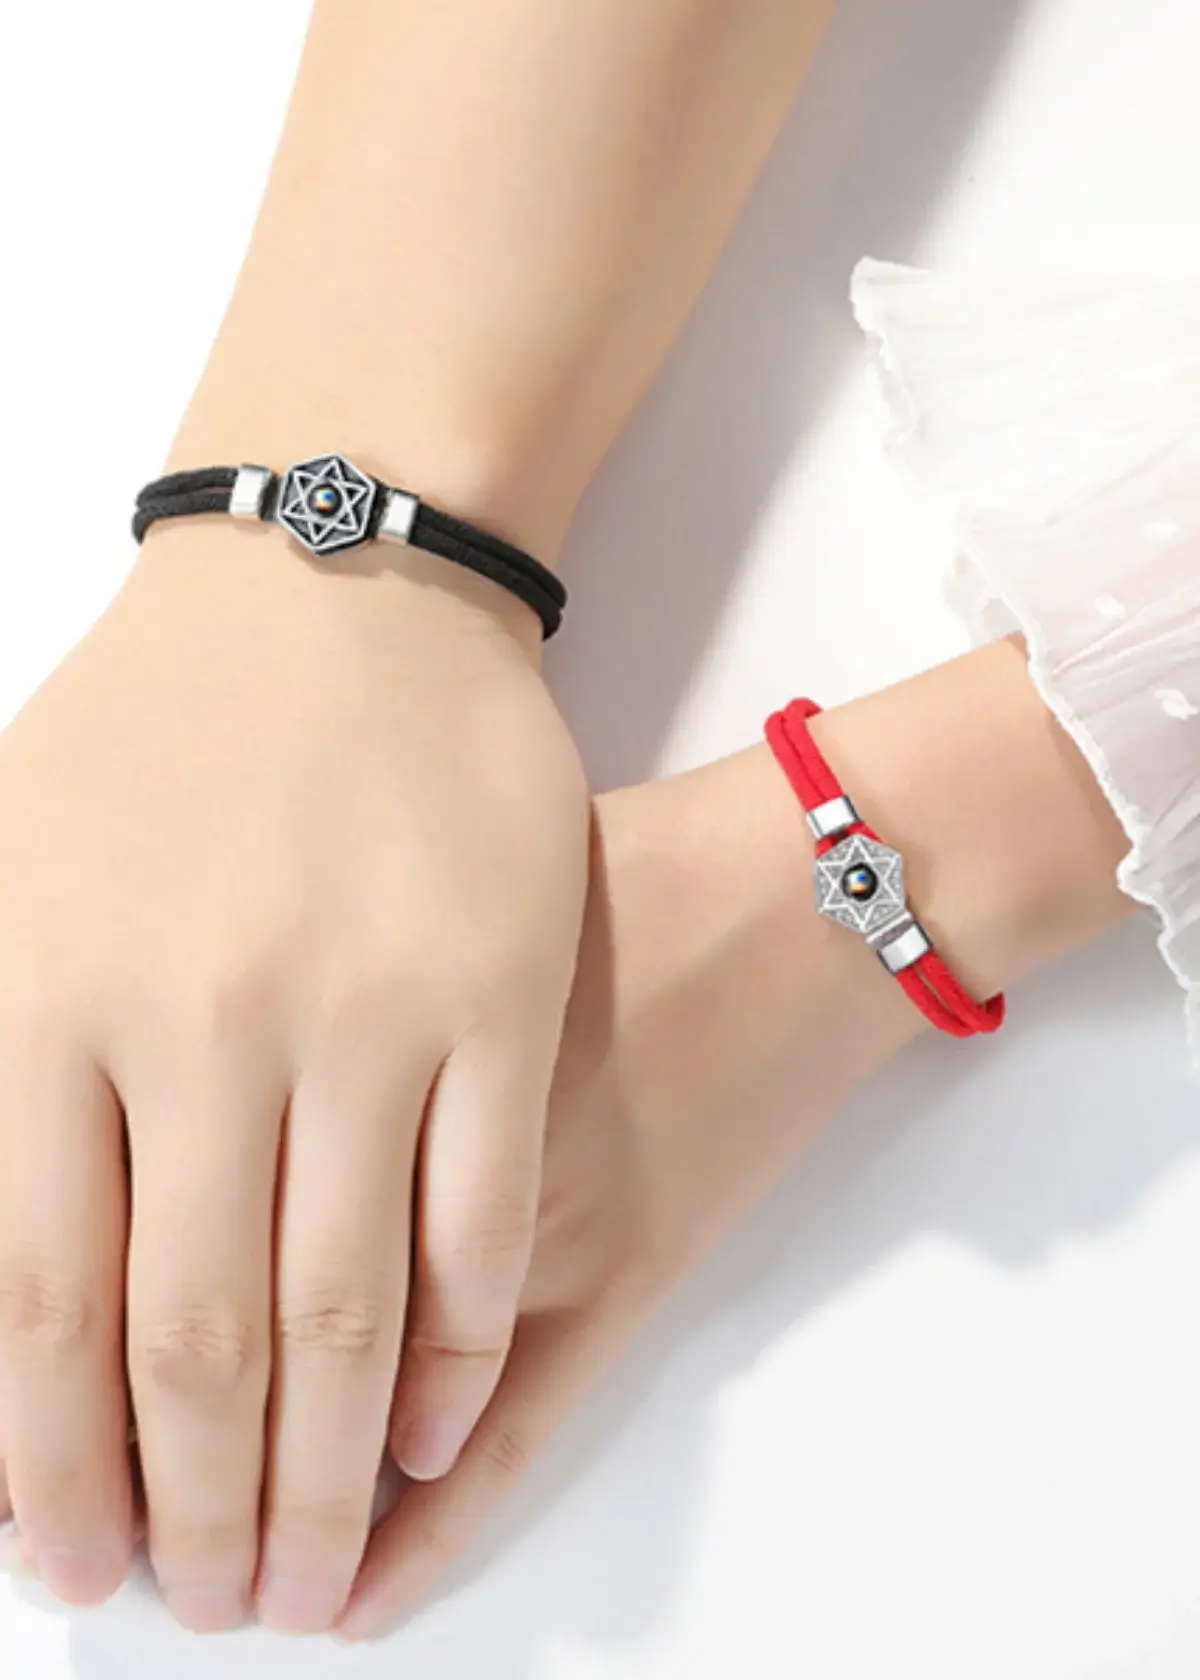 How does a Photo Projection Bracelet work?